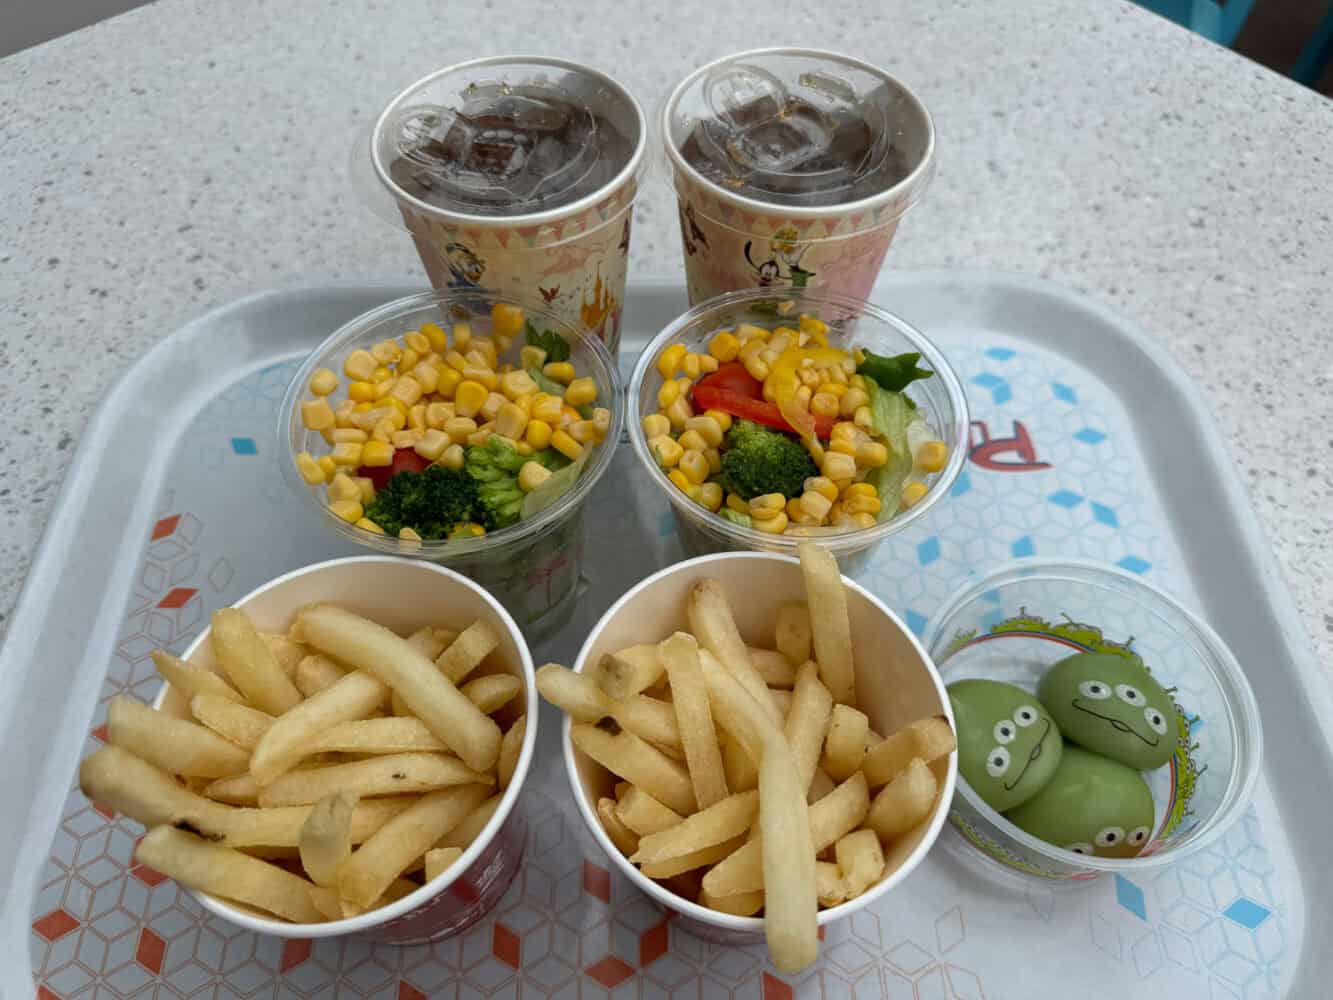 Fries, cup salad, and Little Green Men at Plazma Ray's Diner in Tokyo Disneyland